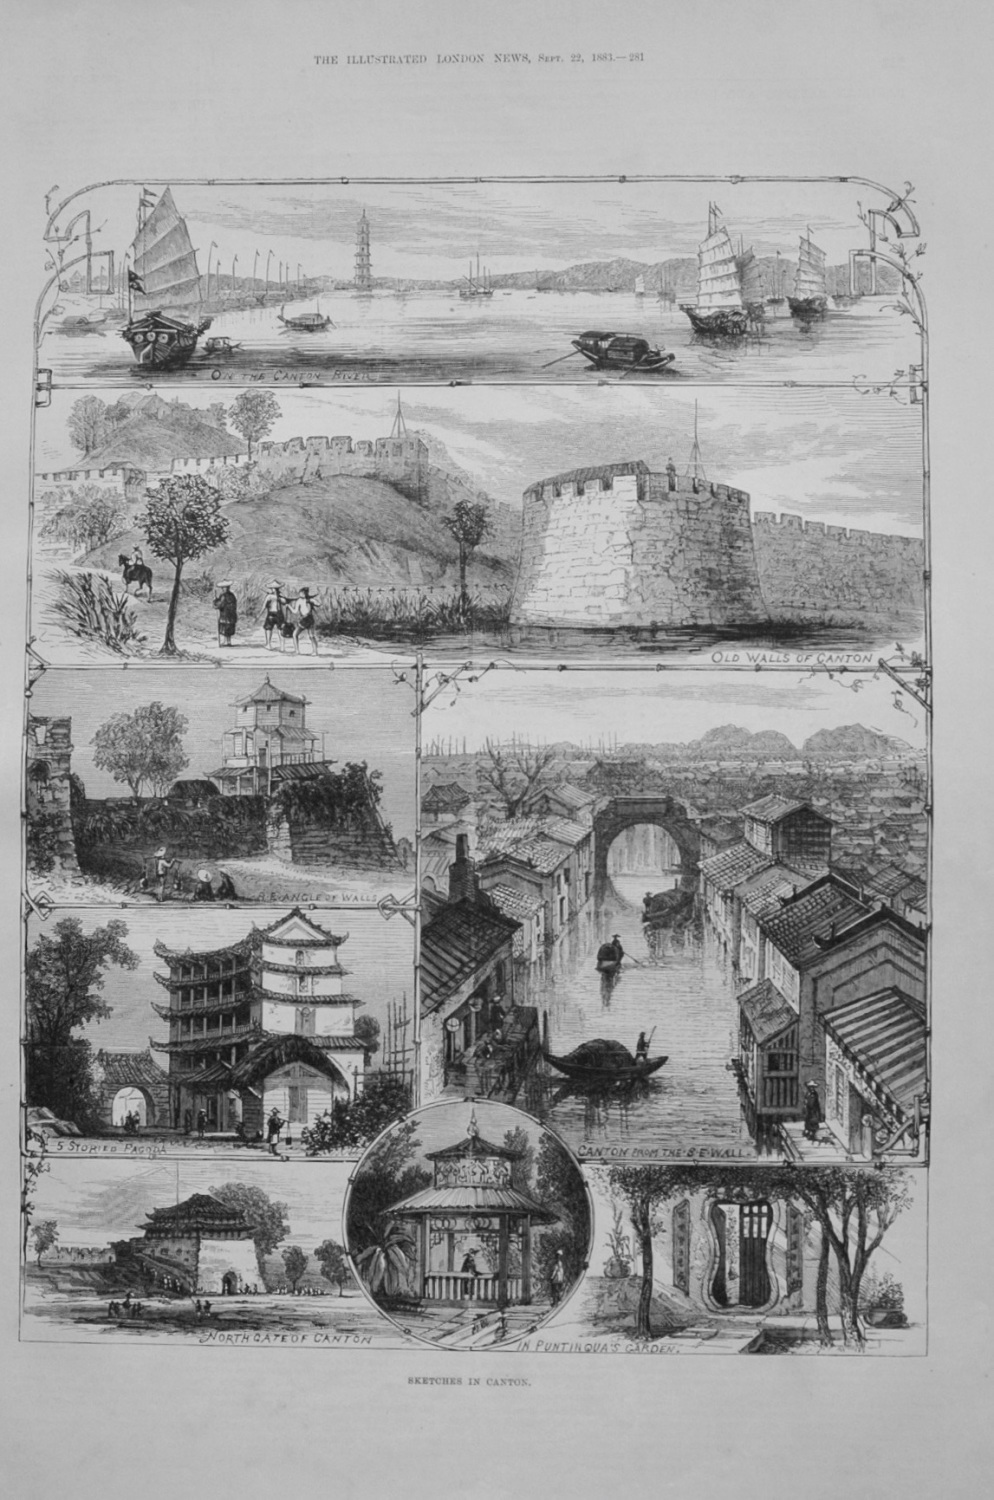 Sketches in Canton - 1883